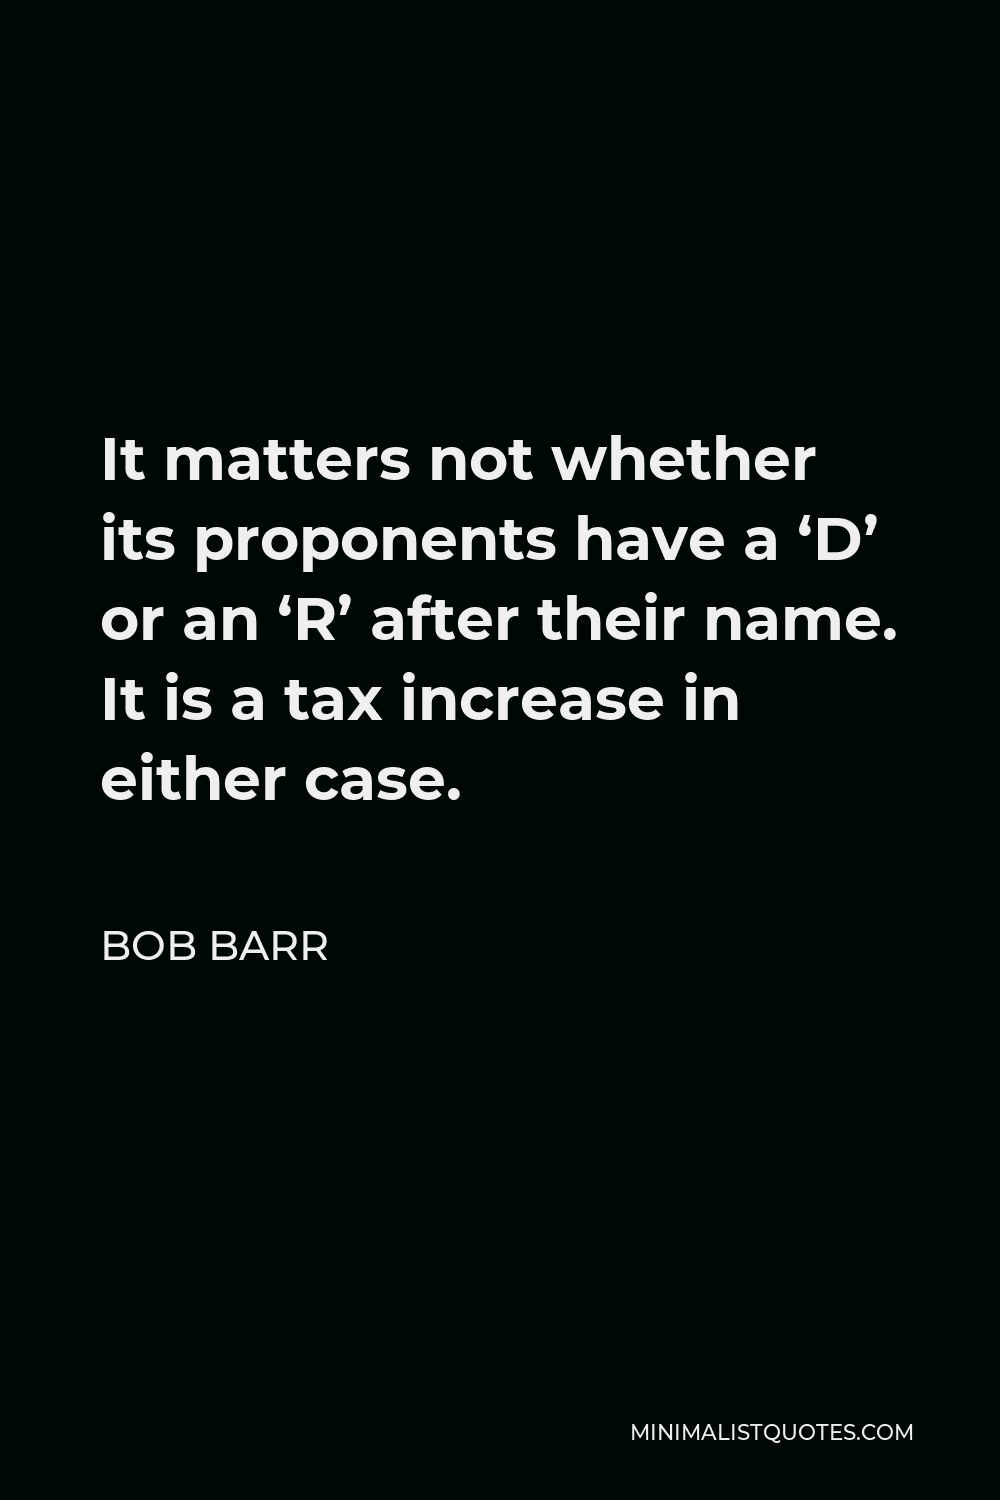 Bob Barr Quote - It matters not whether its proponents have a ‘D’ or an ‘R’ after their name. It is a tax increase in either case.